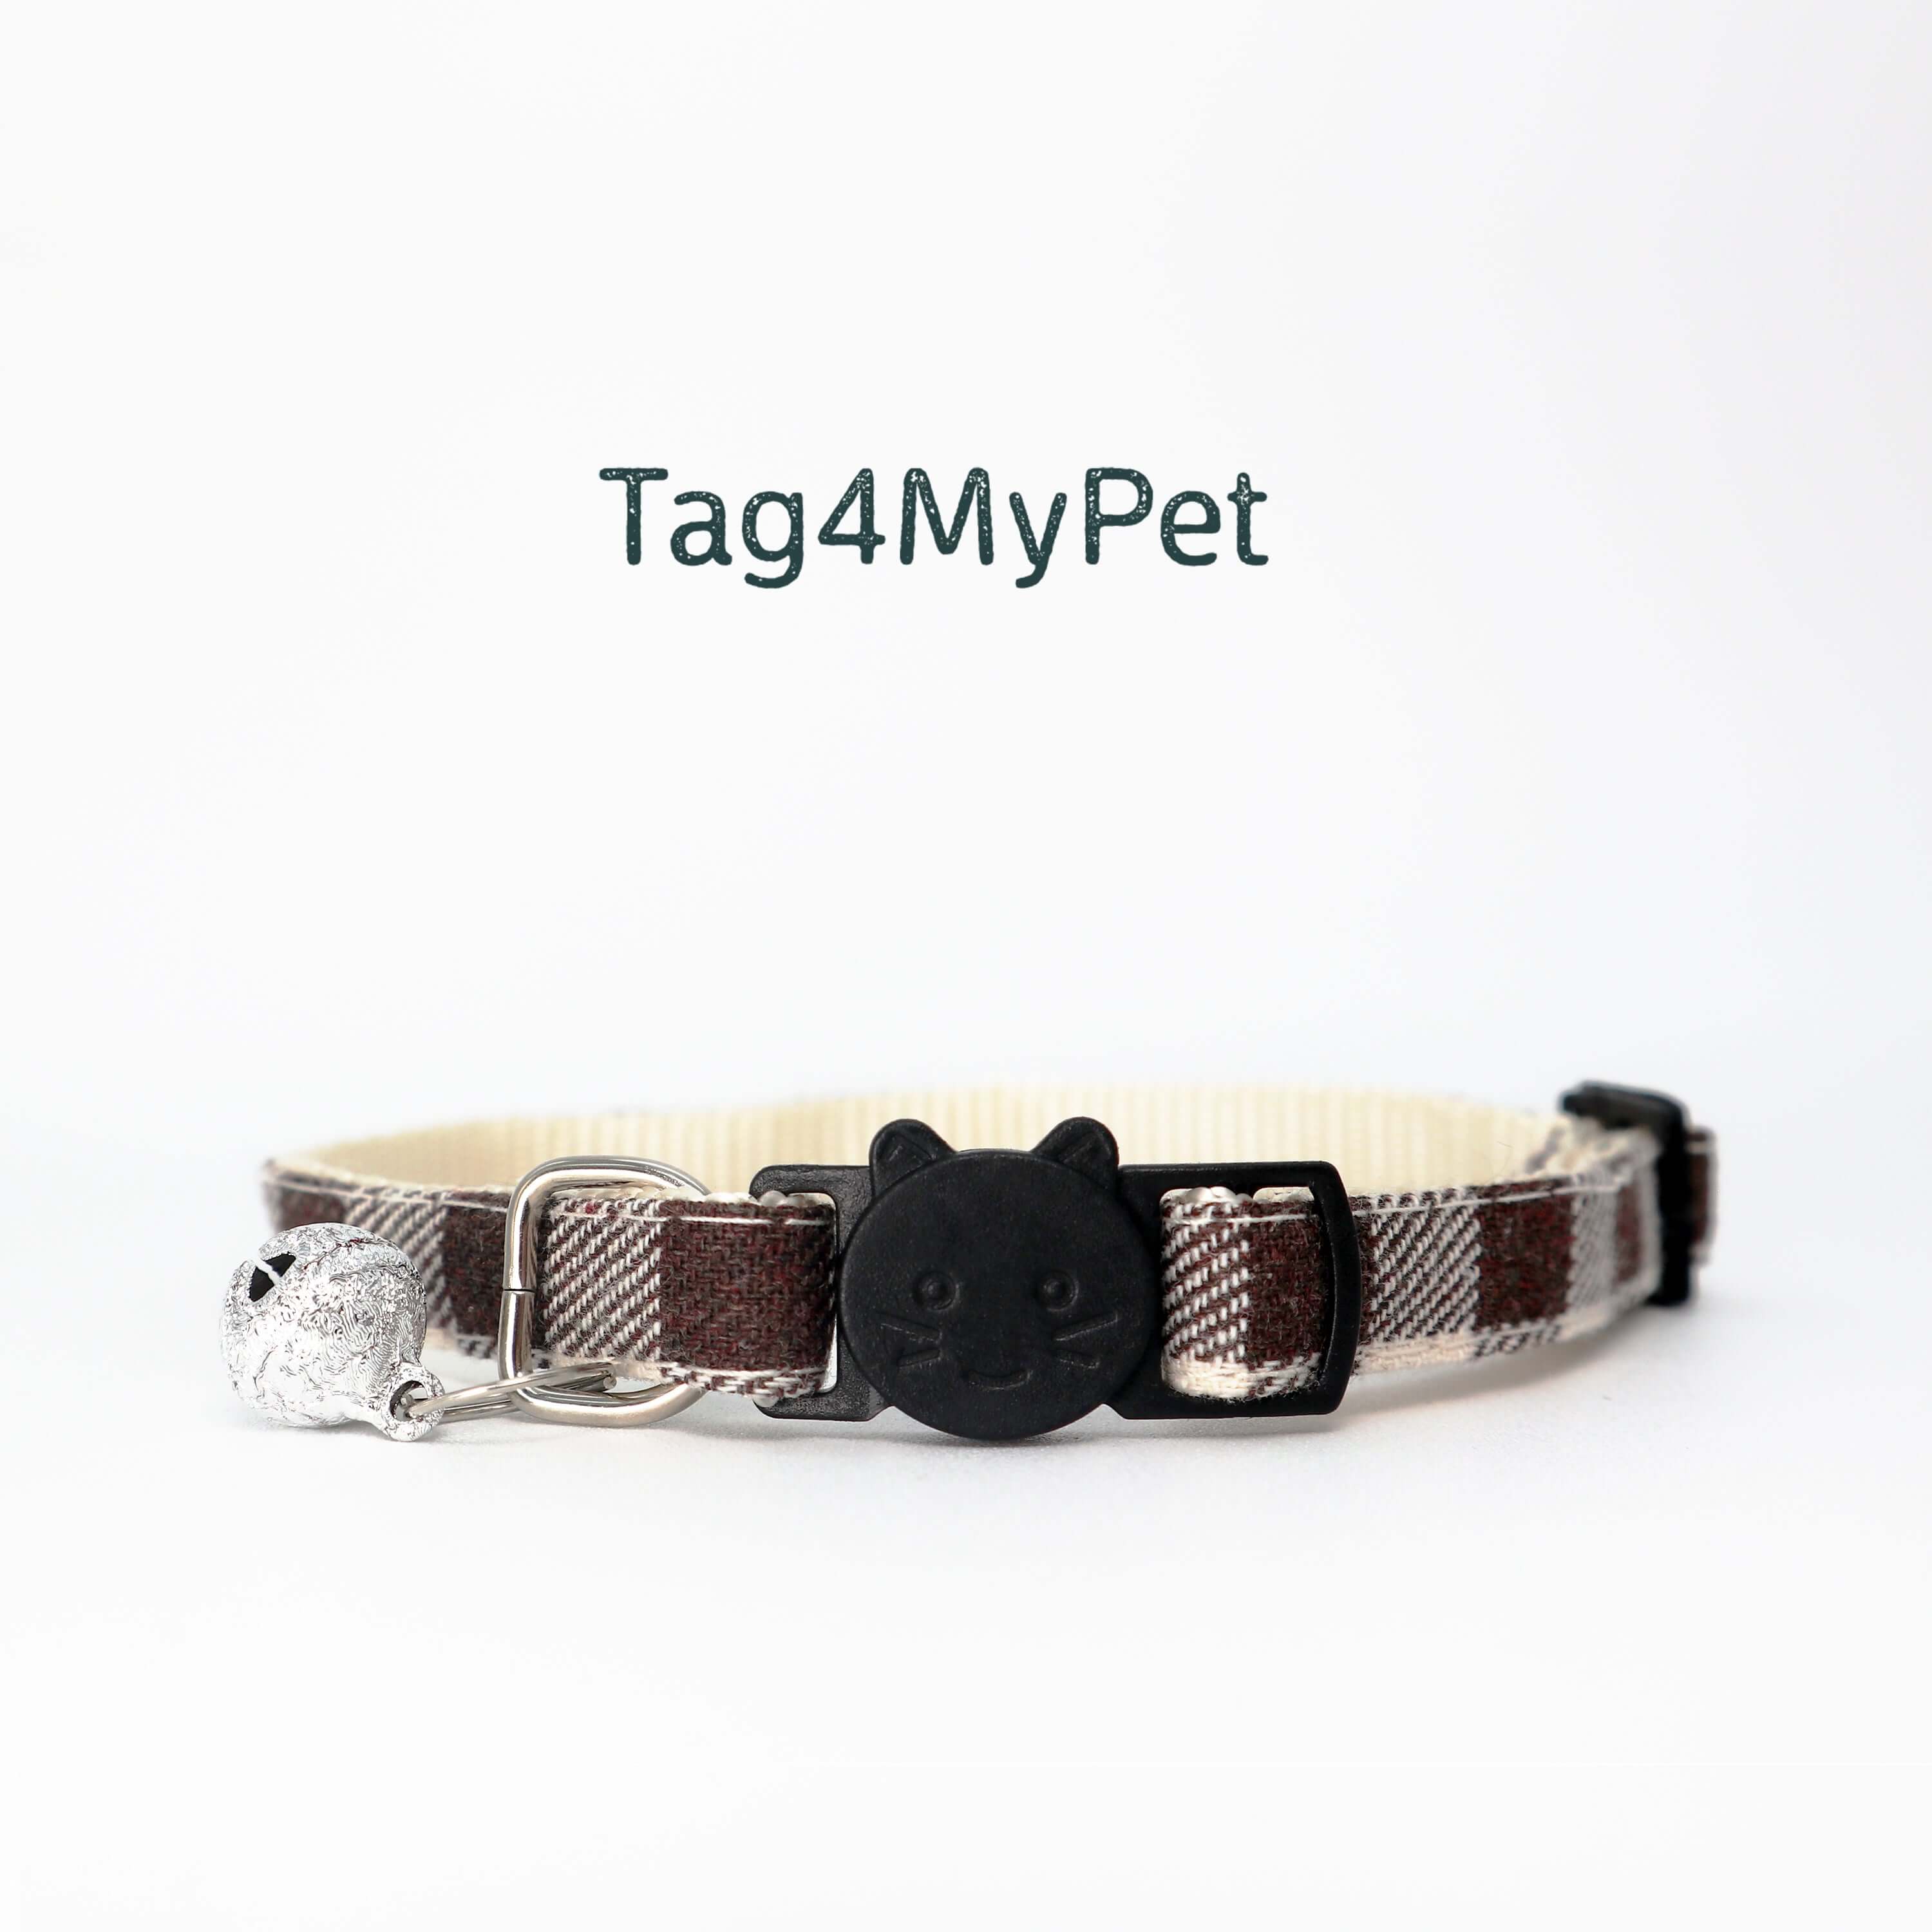 Resistant and Safe Cat Collar in Brown